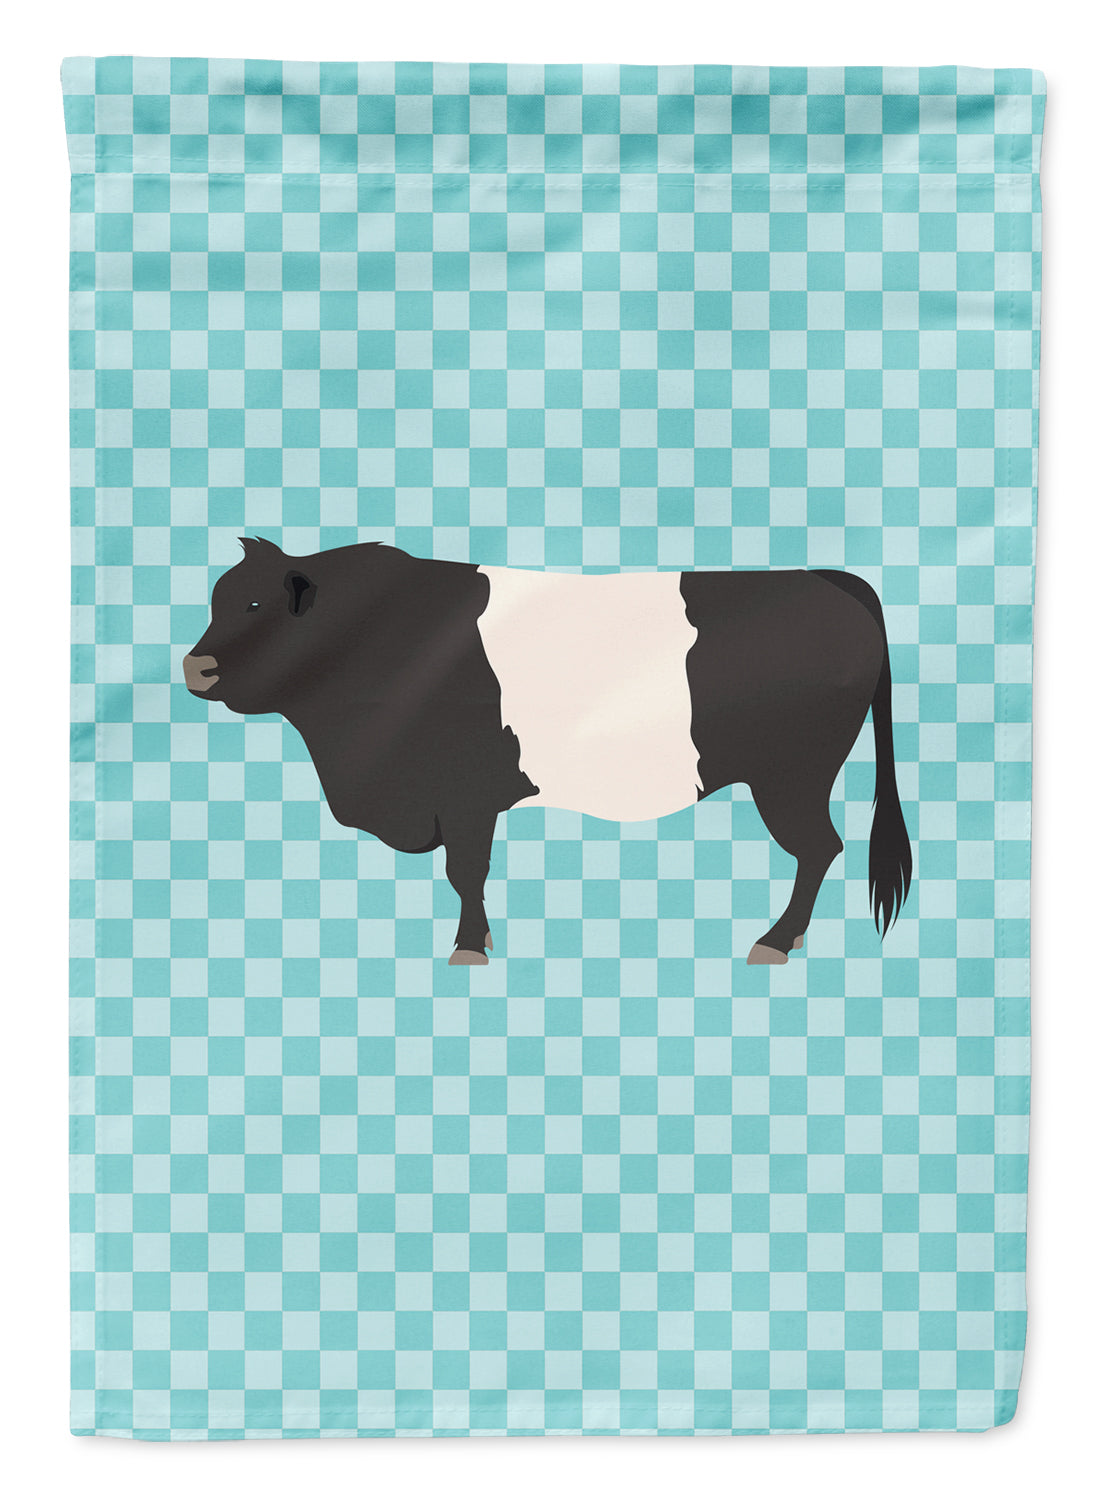 Belted Galloway Cow Blue Check Flag Garden Size